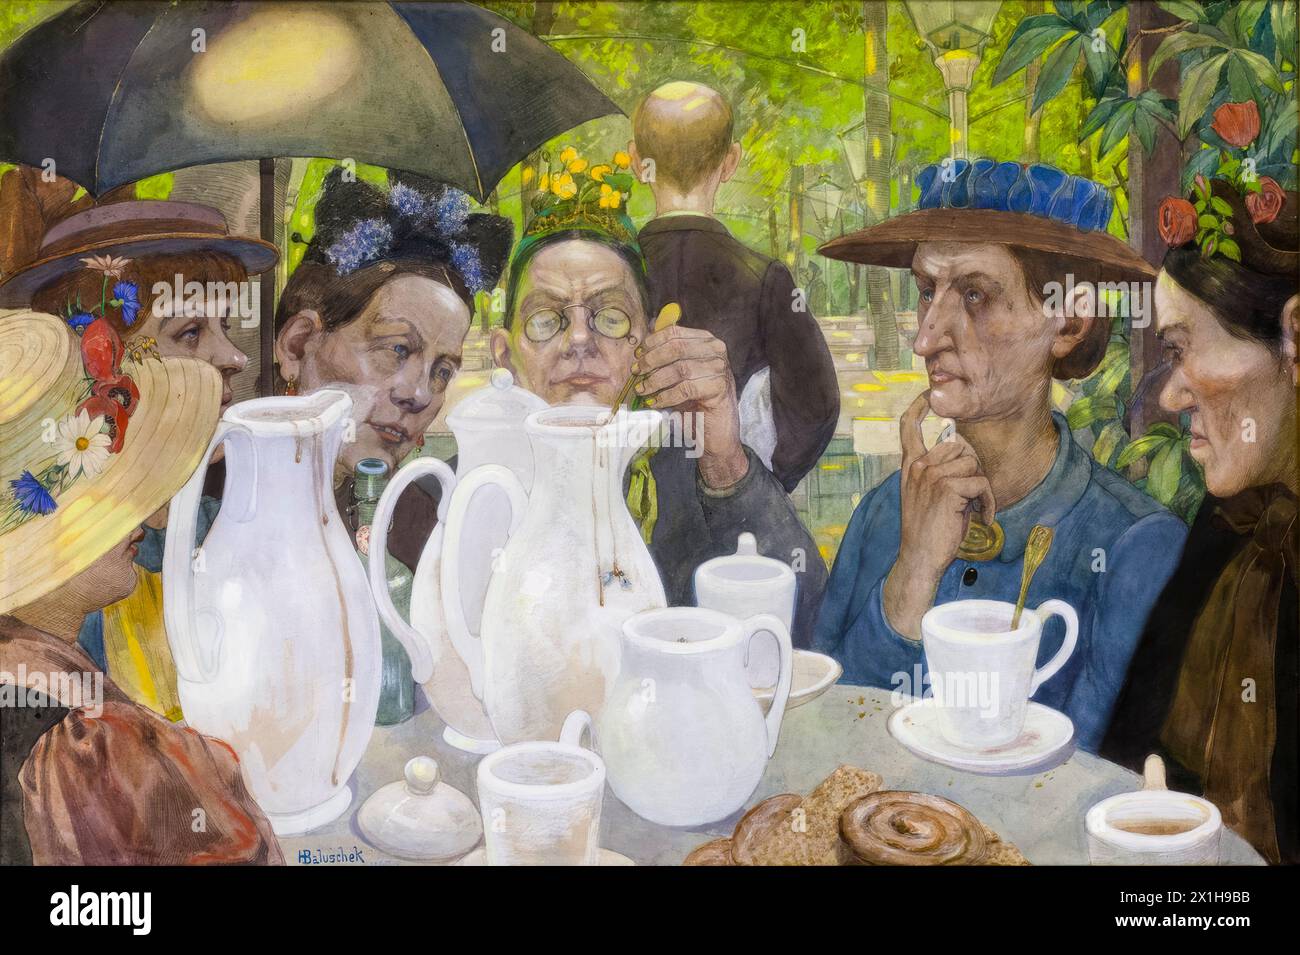 Hans Baluschek, Families can make coffee here, painting in mixed media on cardboard, 1895 Stock Photo